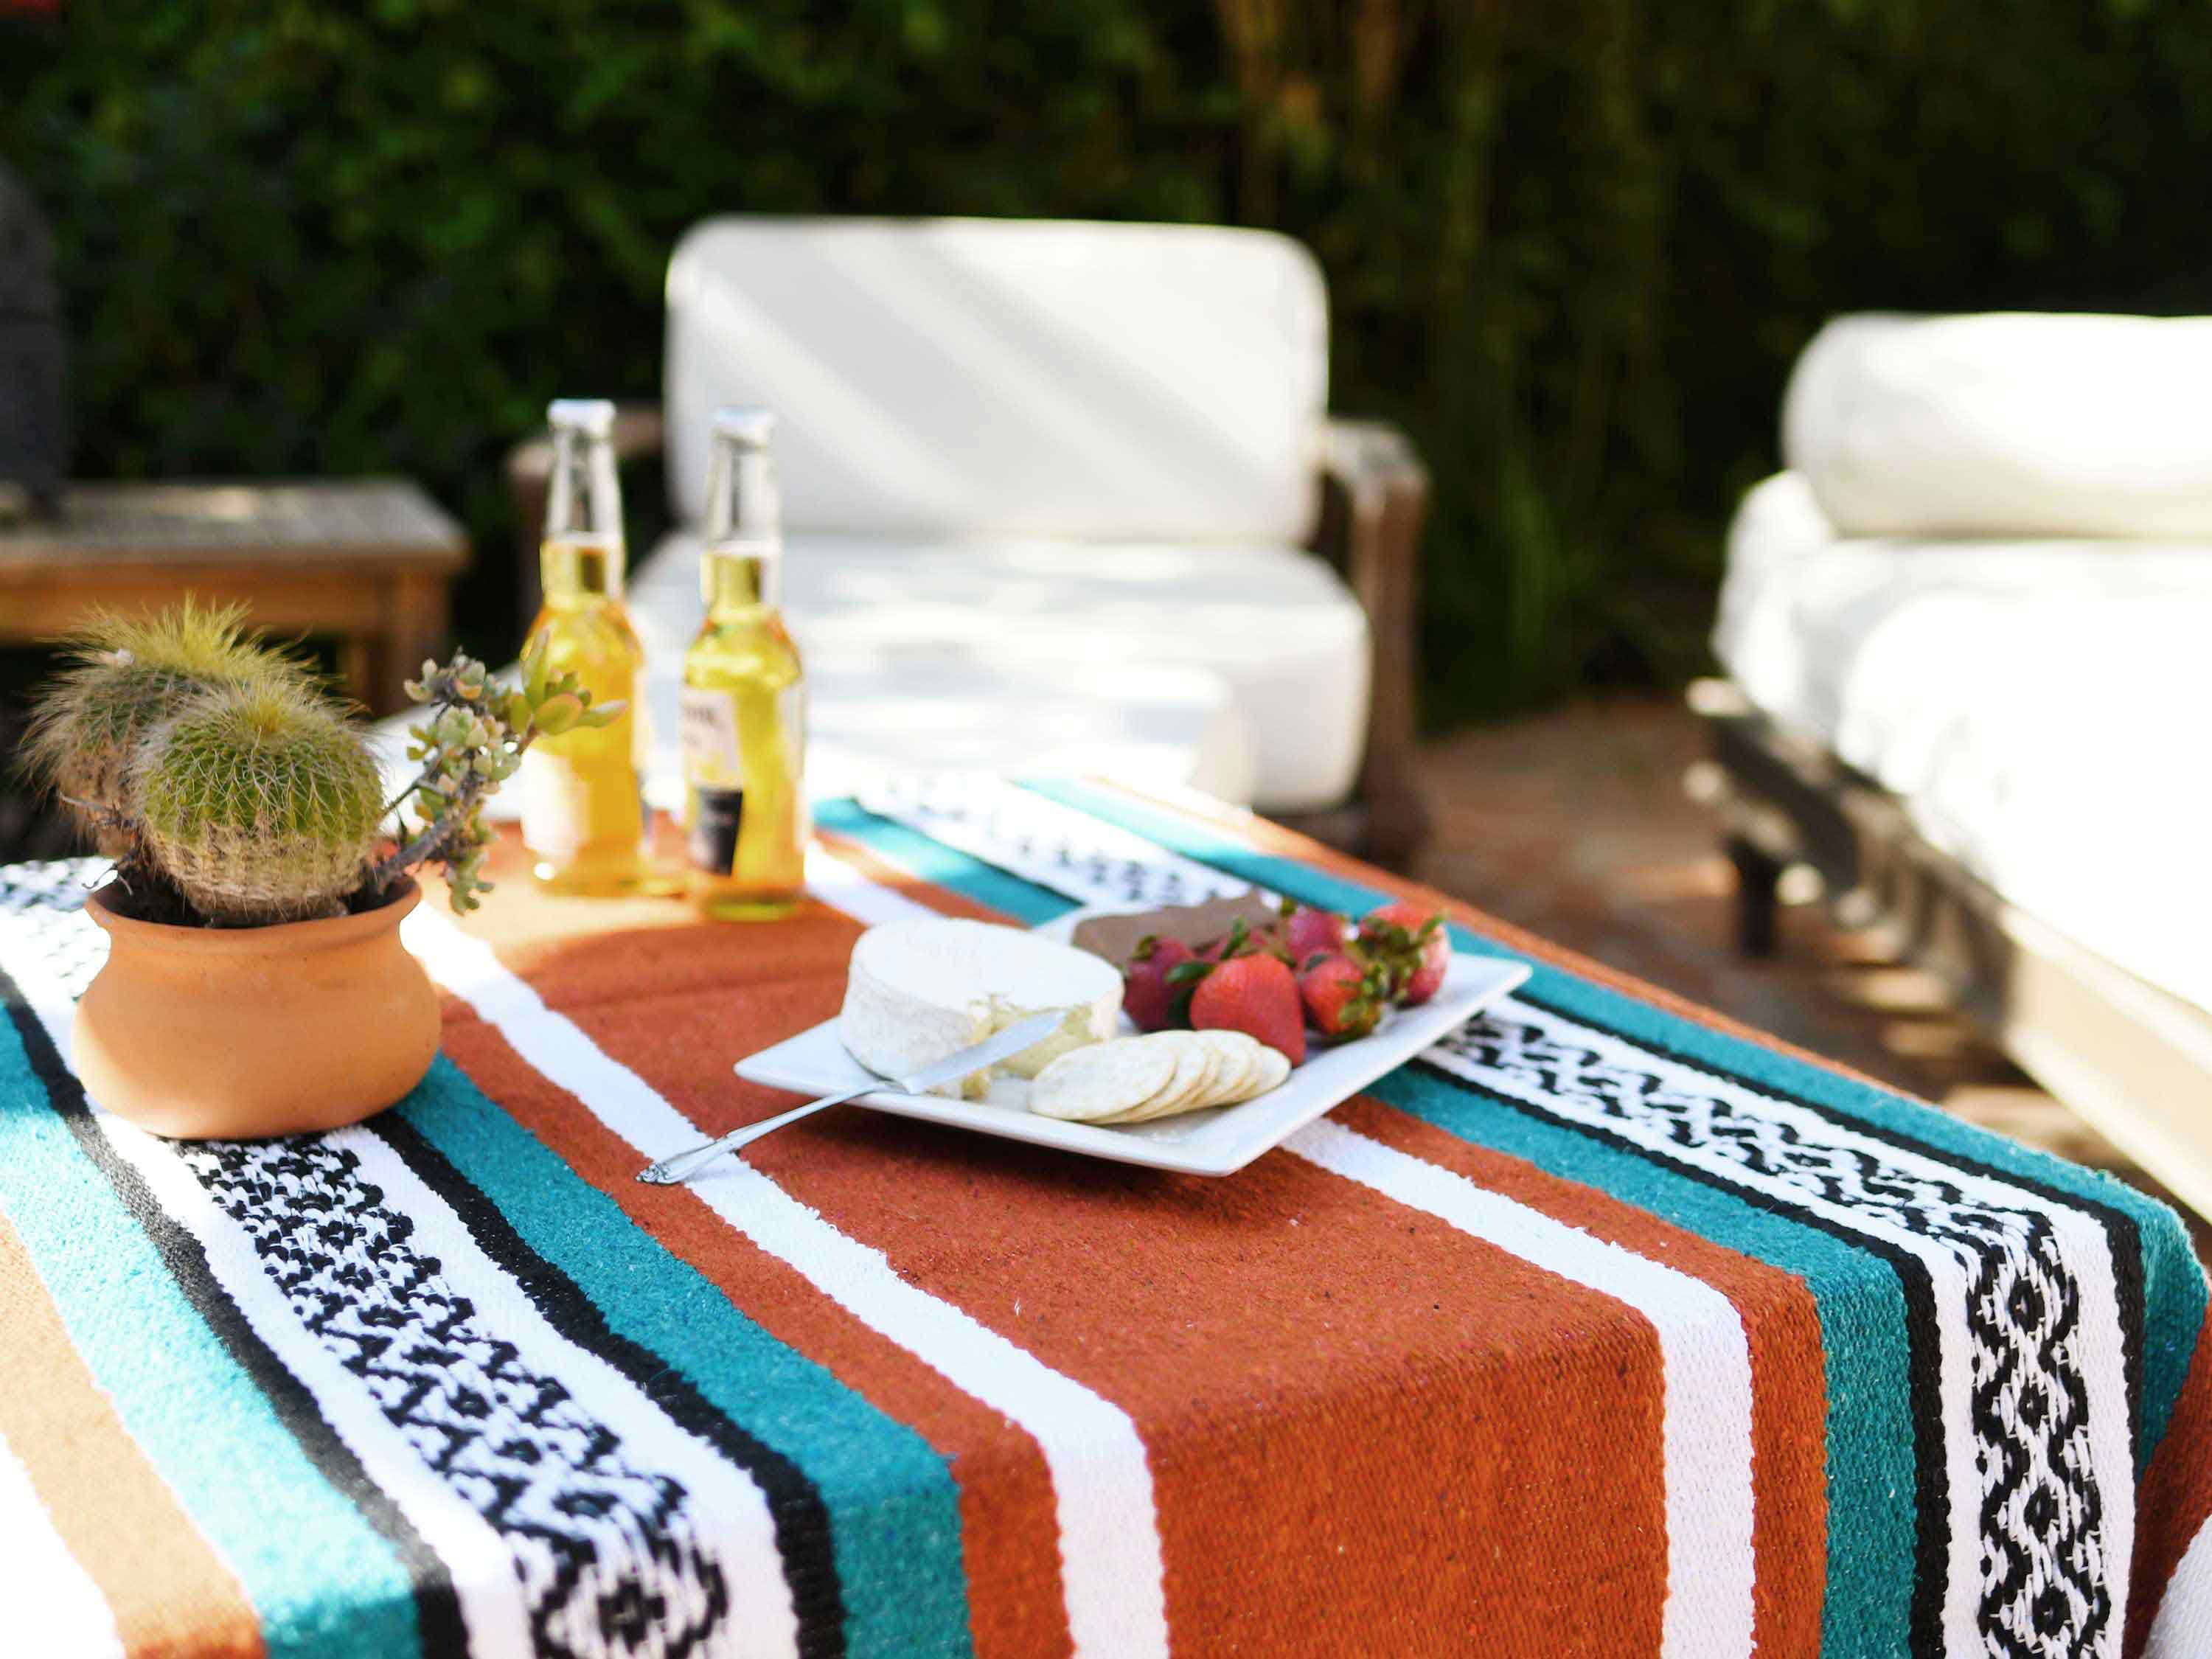 A Mexican blanket draped over a table with a picnic set.